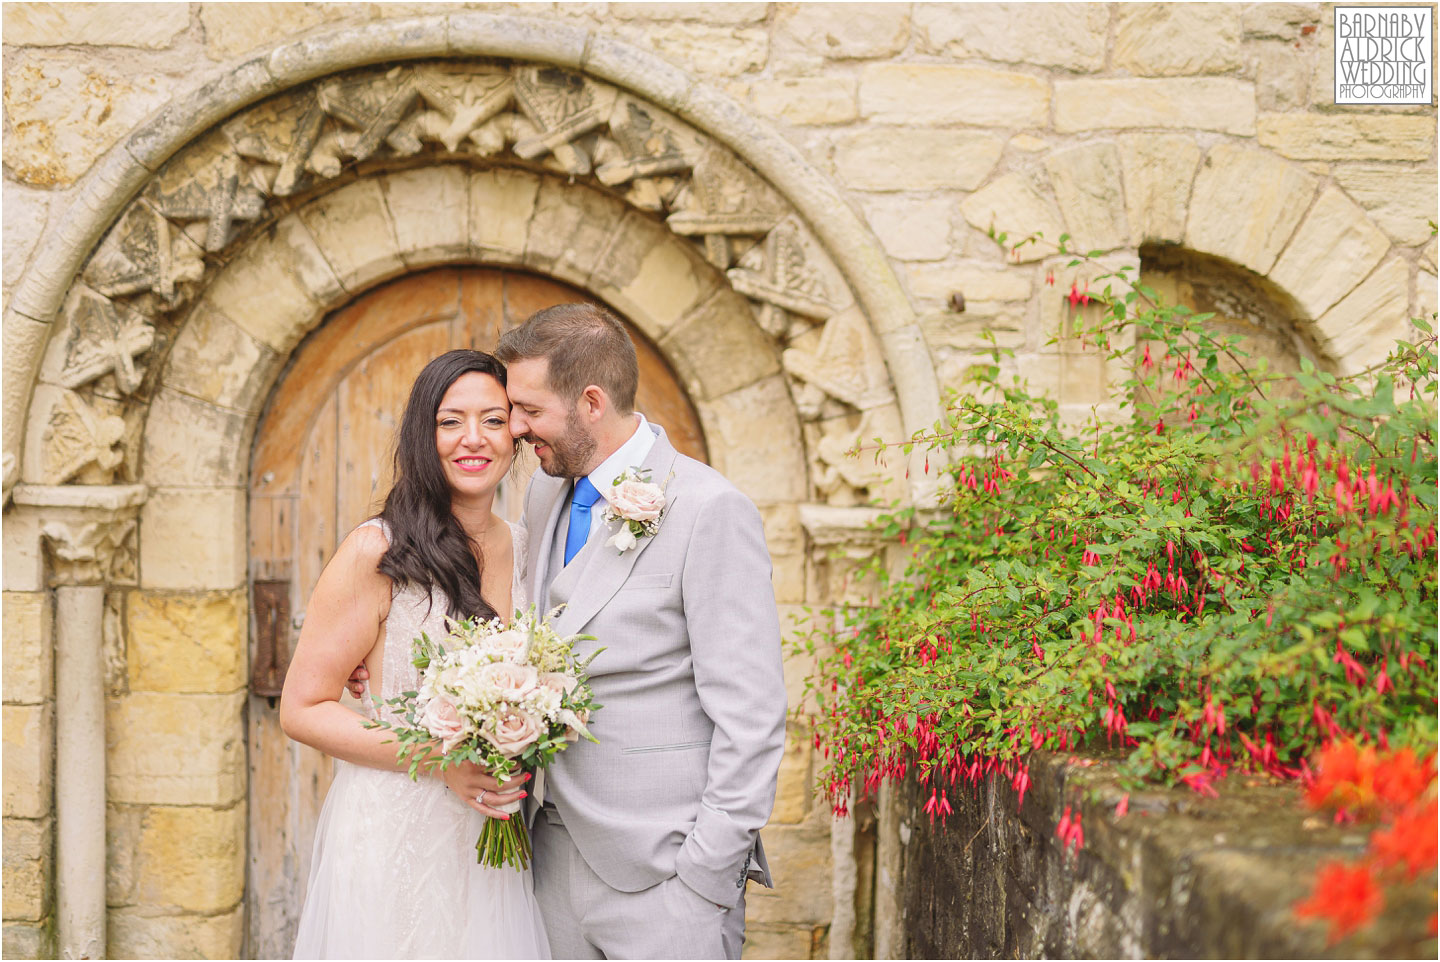 Wedding portraits at Priory Cottages, Rainy portrait locations at Priory Cottages, Priory Barn Yorkshire Wedding Photographer, Priory Cottages Wedding, Priory Farm and Cottages Wedding, Yorkshire Wedding Photographer